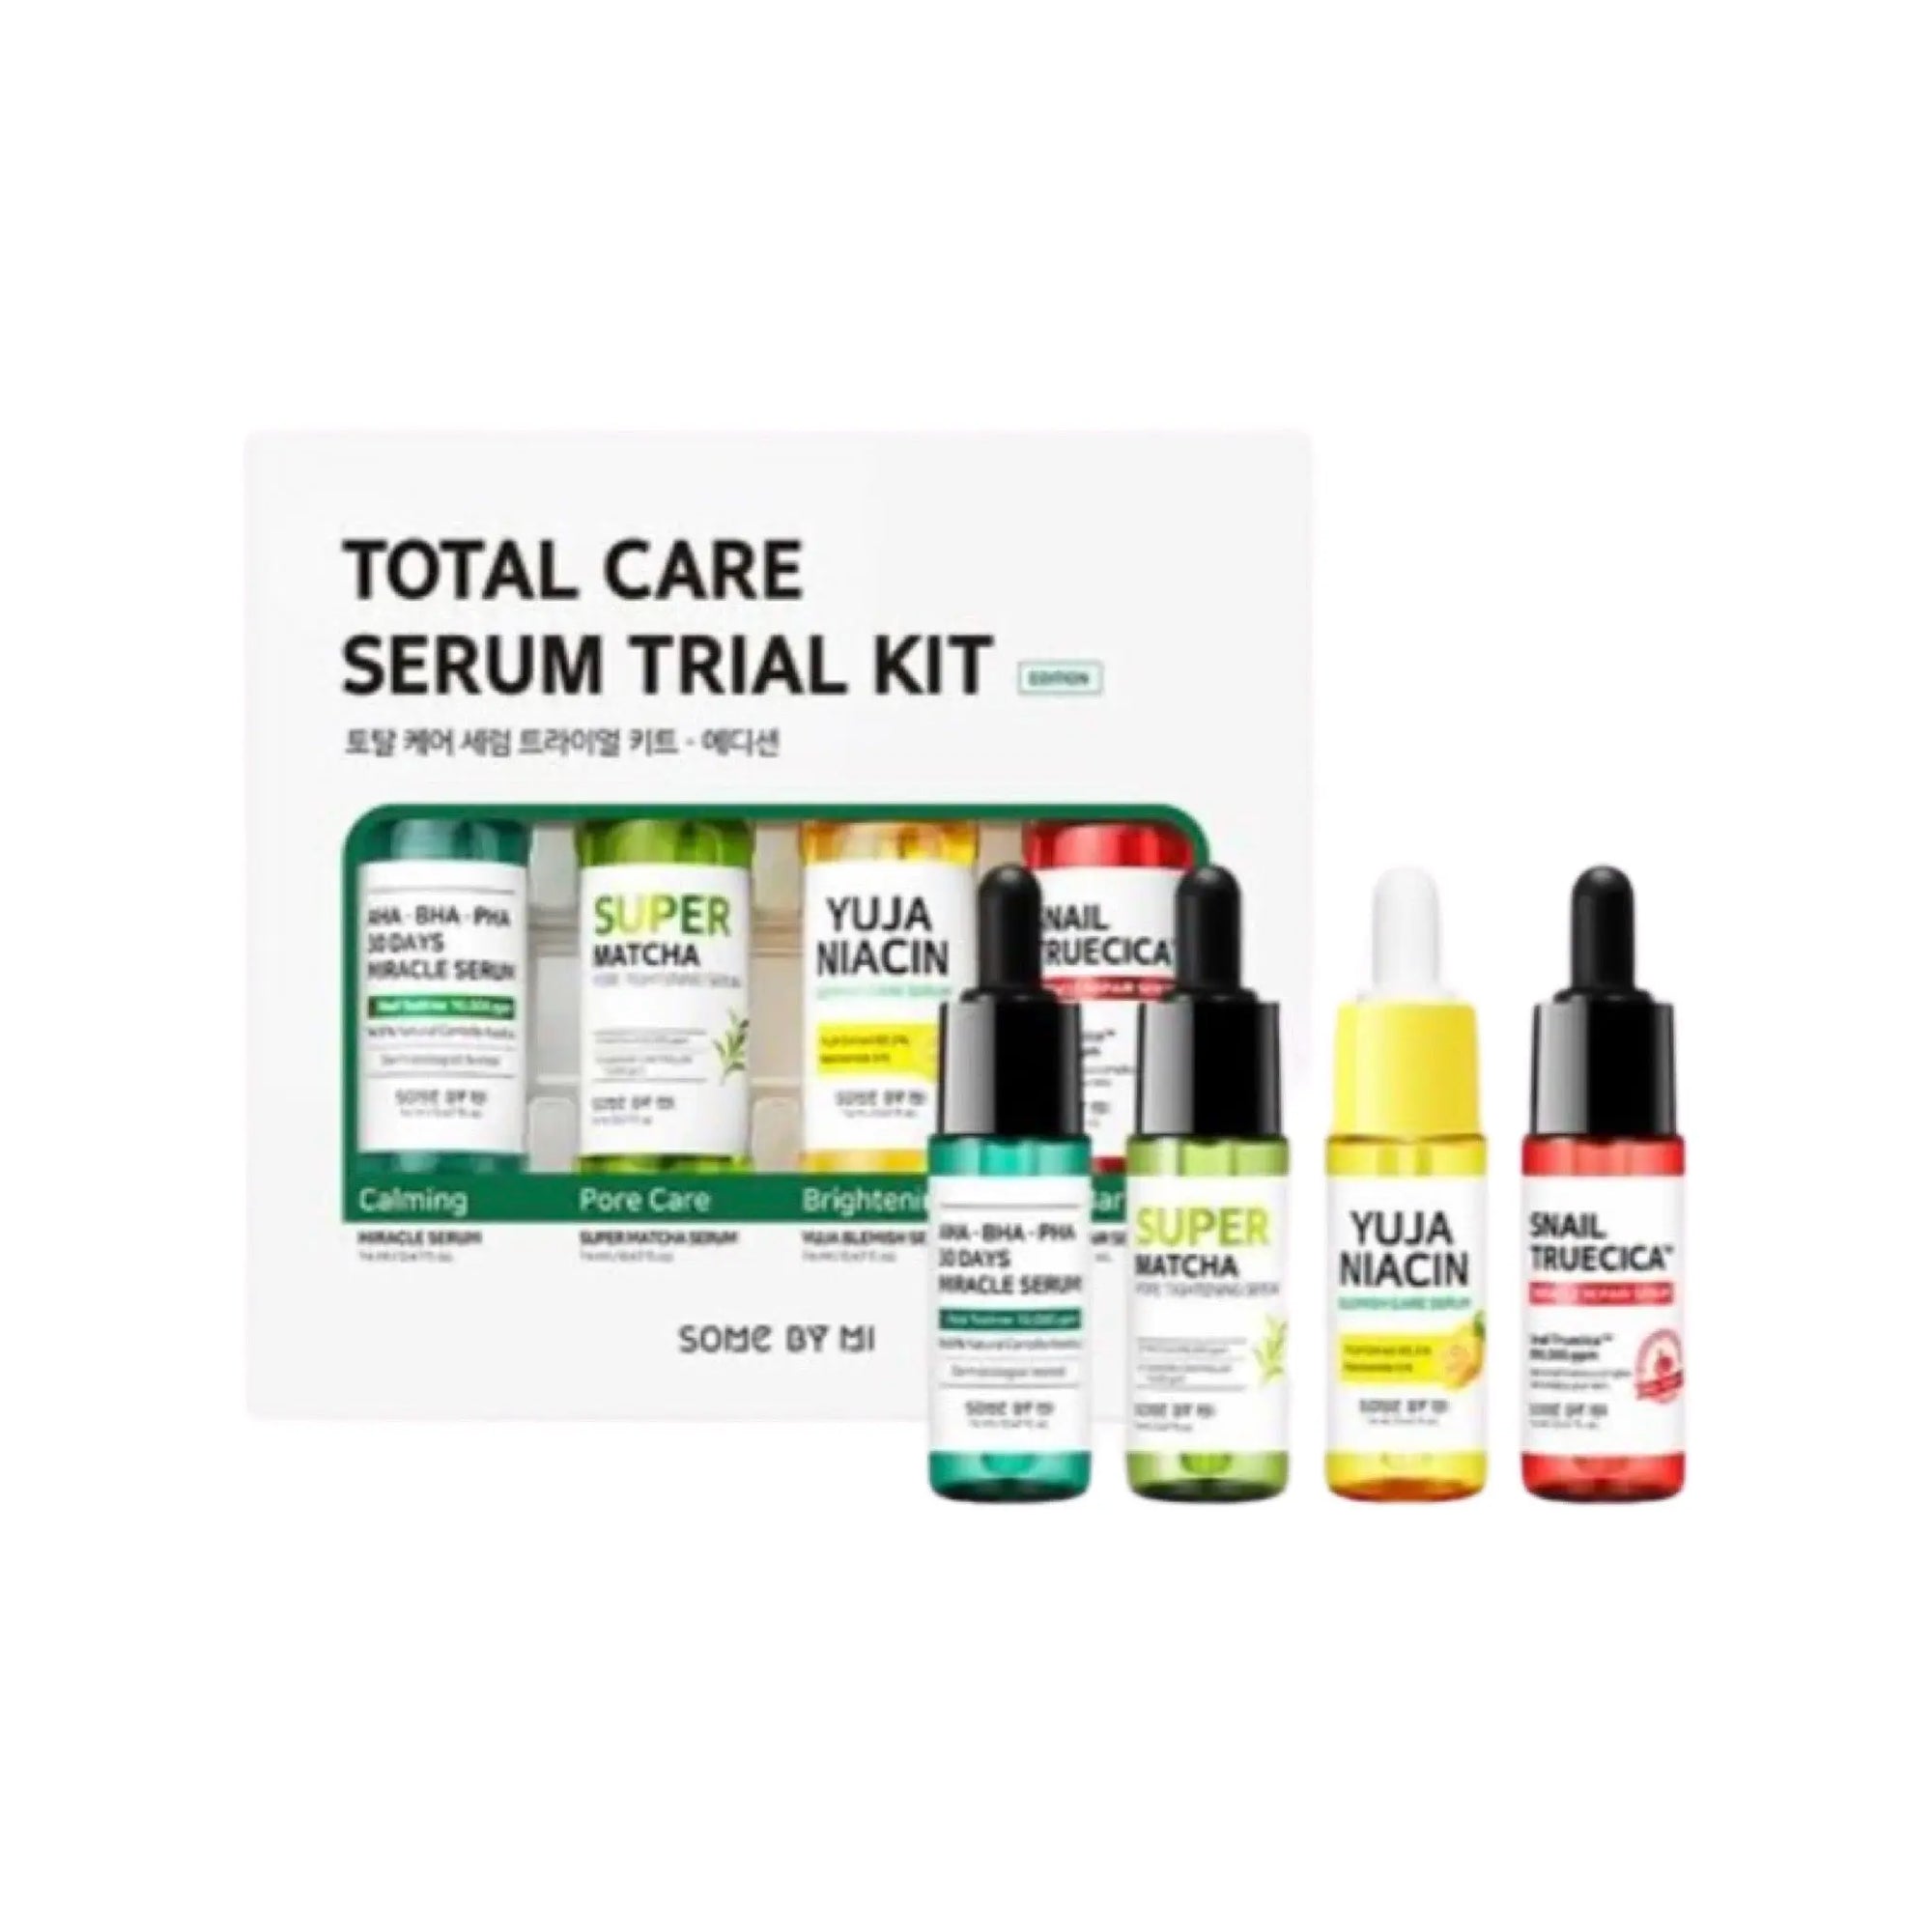 Some By Mi - Total Care Serum Trial Kit Some By Mi